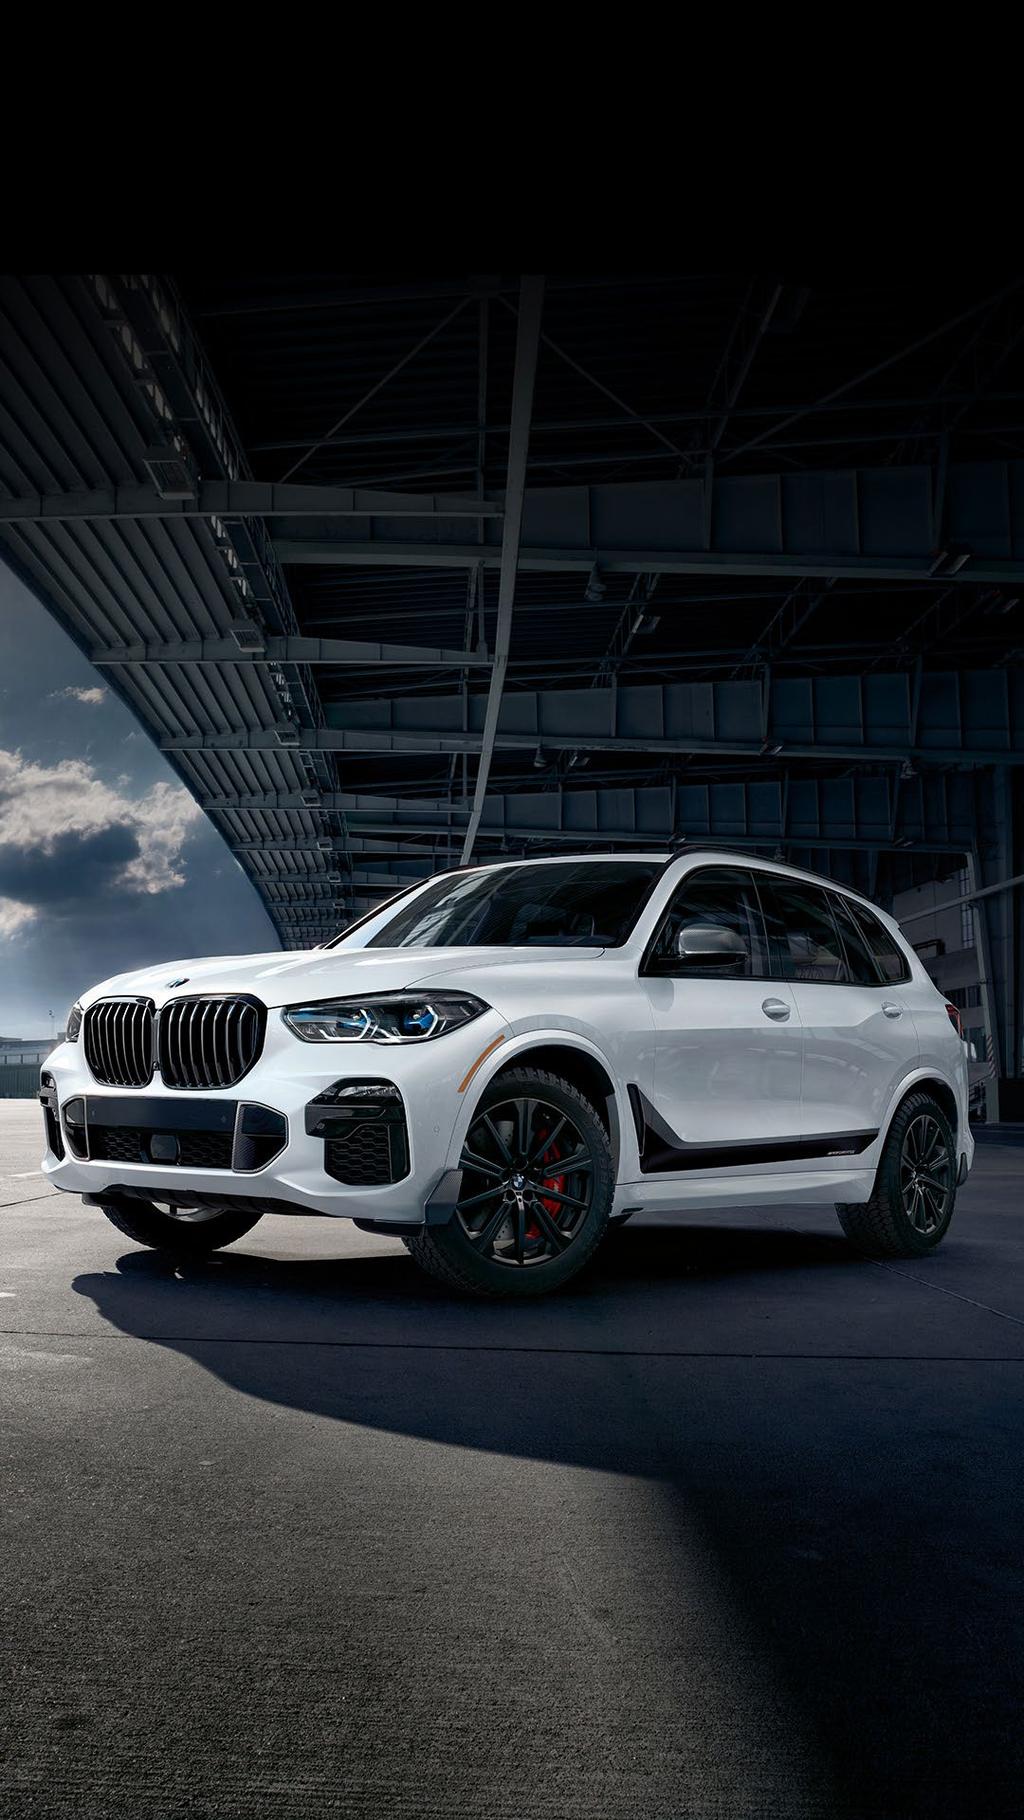 SHOW STOPPER. BMW X5 ACCESSORIES. Make a style statement. Visit ShopBMWUSA.